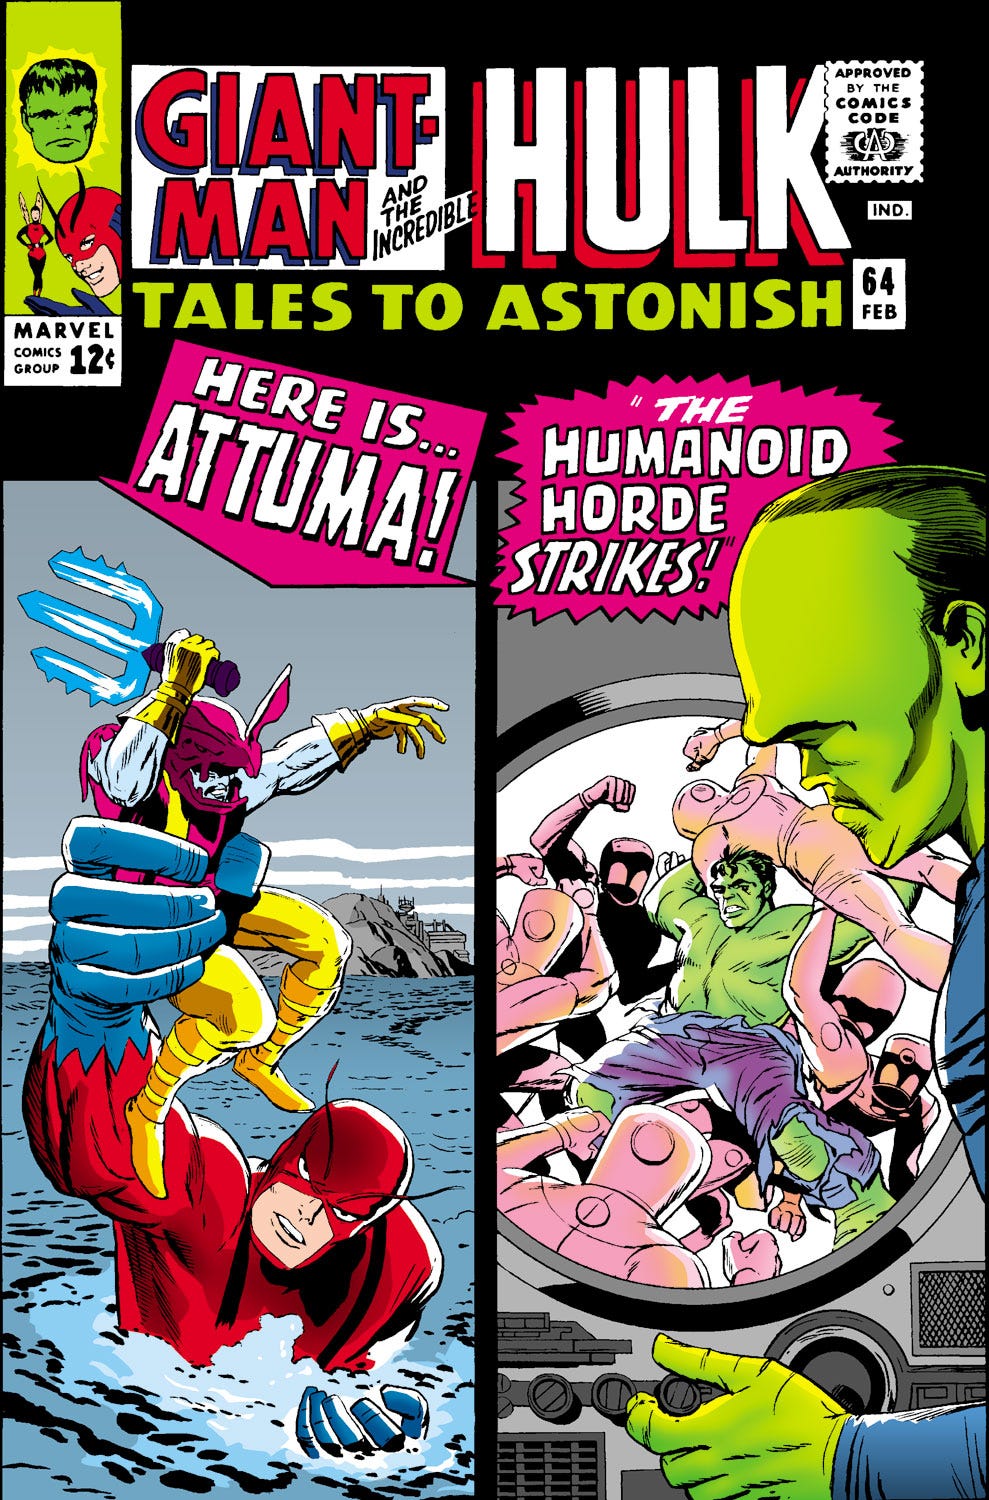 Tales to Astonish (1959) #64 | Comic Issues | Marvel